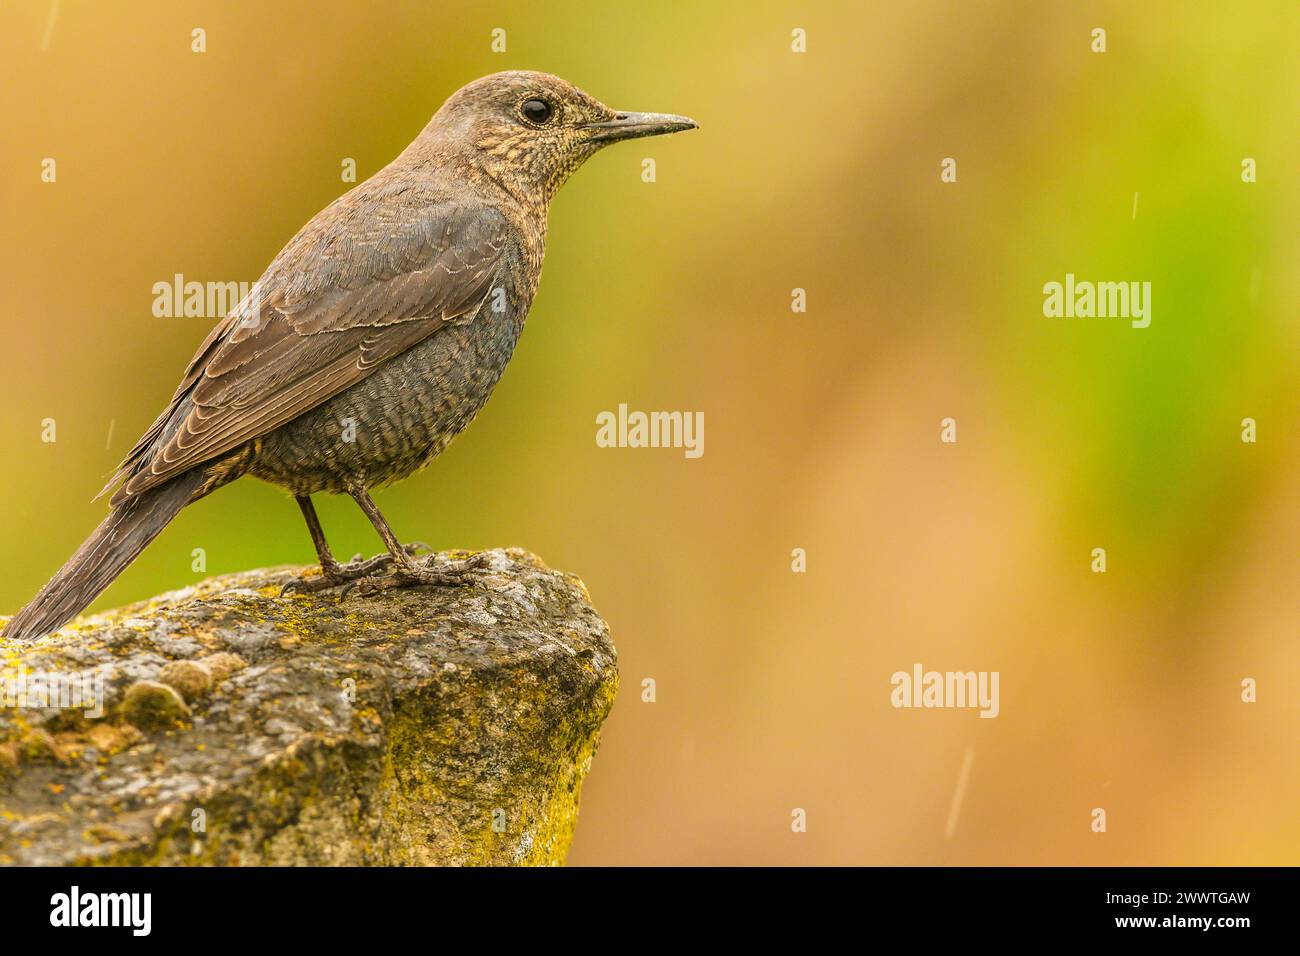 Blue rock thrush (Monticola solitarius).  Female perched on rock on a rainy day.  Lleida province, Catalunya, Spain. Stock Photo